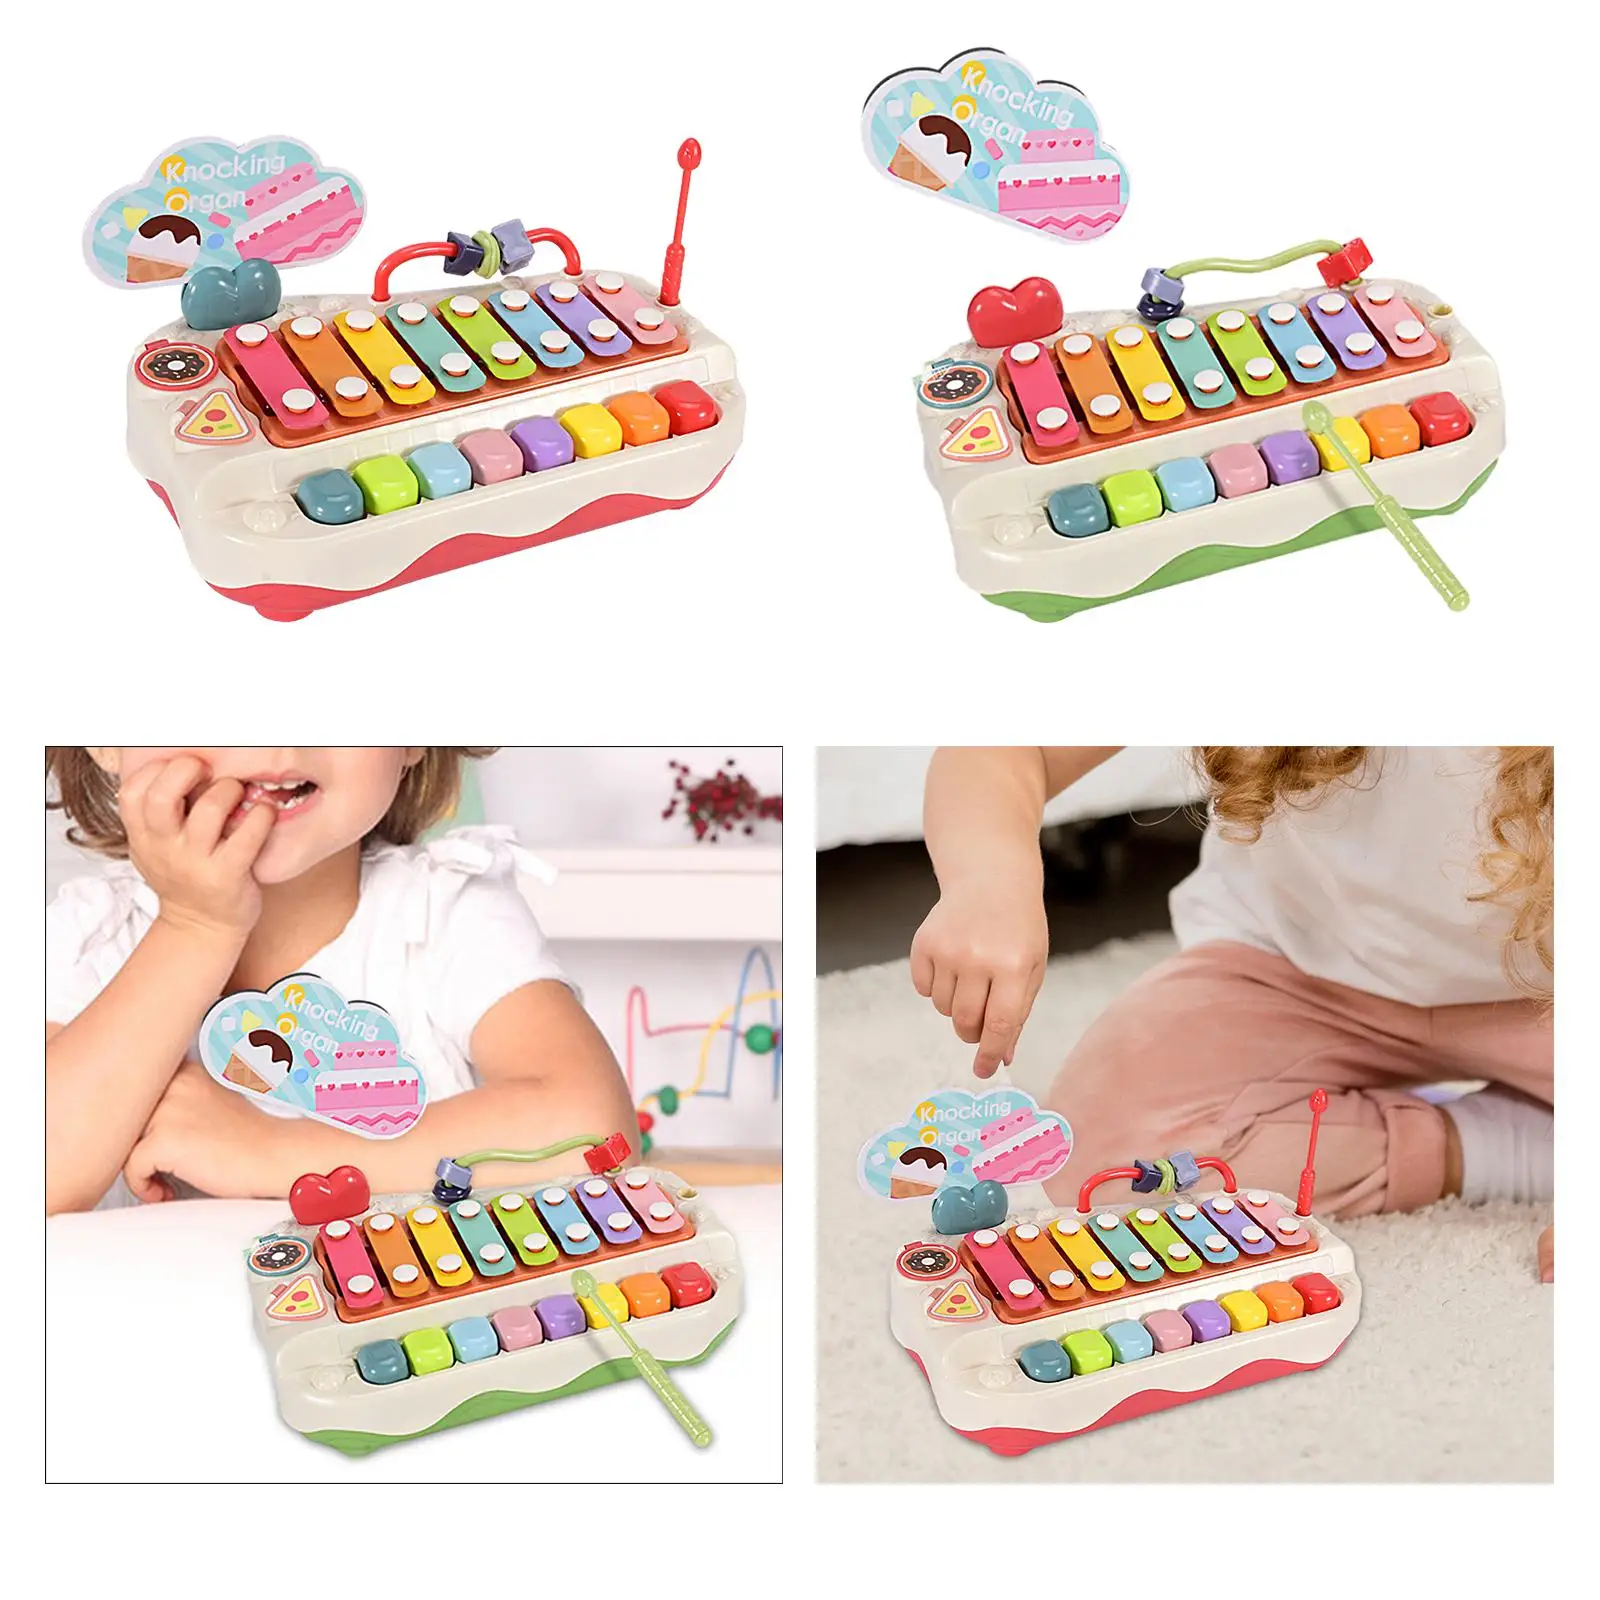 Baby Musical Toy Montessori Preschool Educational Motor Skills Colorful Piano Toy for Kids 3+ Baby Boy Girls Toddler Gifts